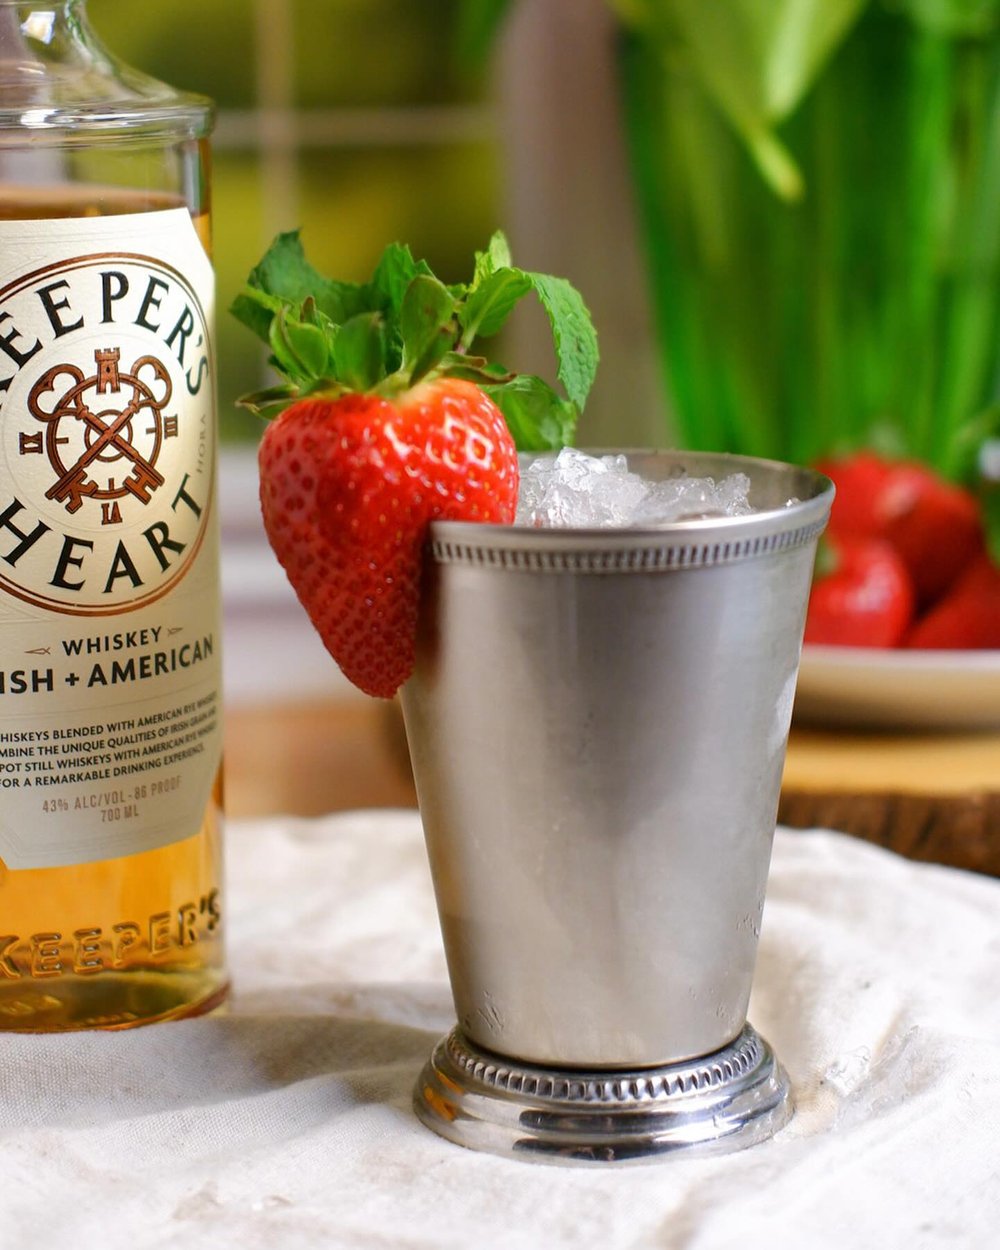 I had so much fun making this strawberry mint julep with @keepersheartwhiskey recently I decided to share a blog post about it! It walks you through how to make the strawberry syrup, how to build the cocktail, recommended tools; all about @keepershea